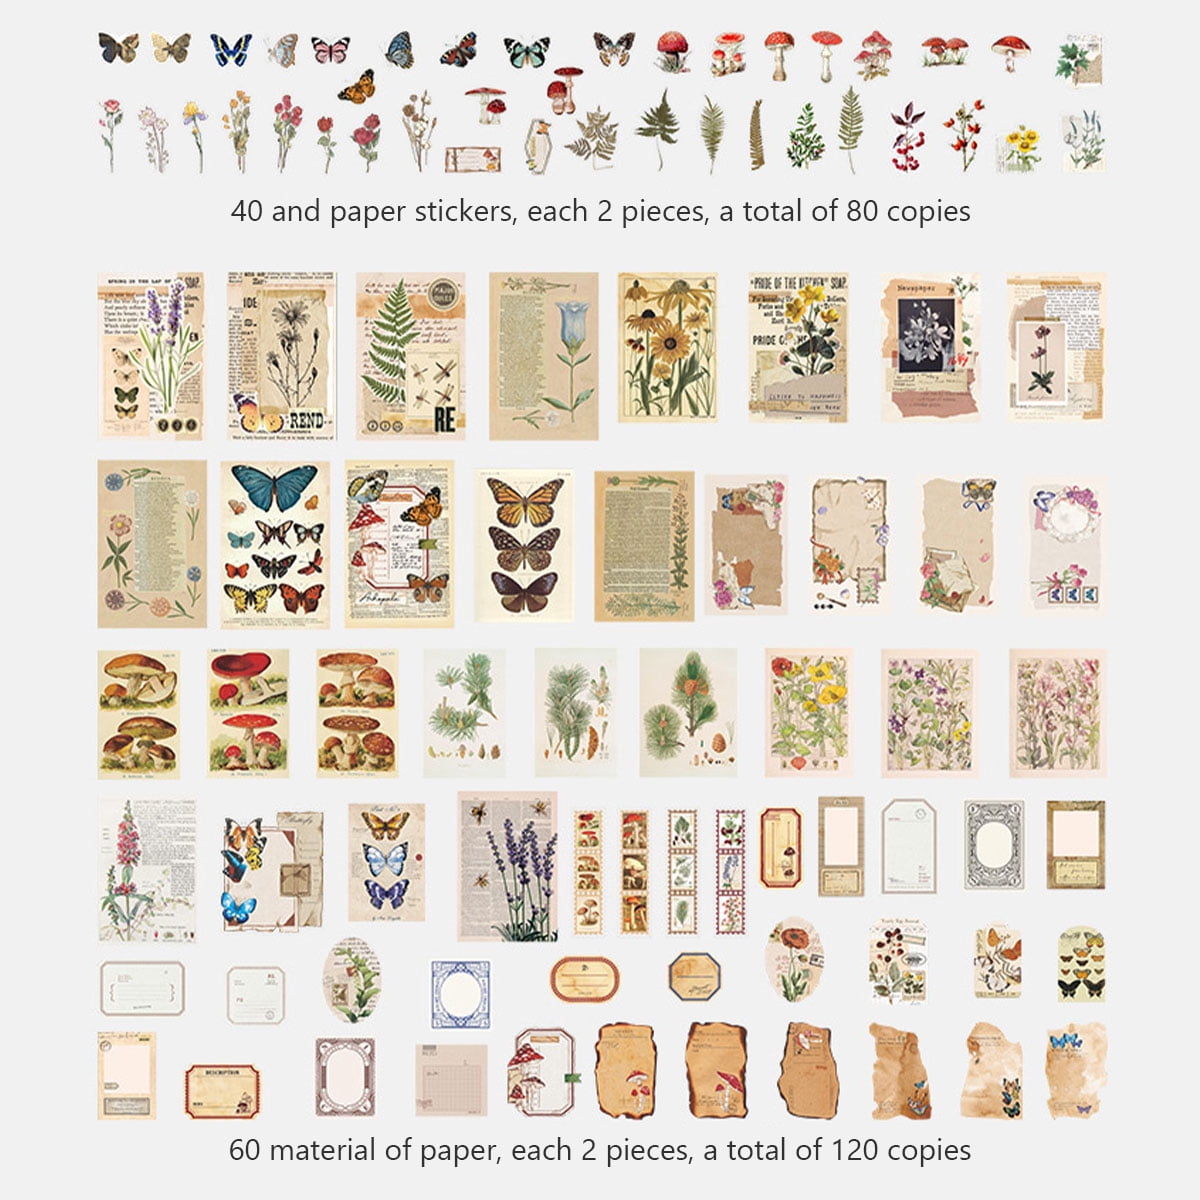 Procicia Vintage Stickers For Scrapbooking, 50 Pieces Vintage Washi Paper  Stickers for Journaling, Vintage Self Adhesive Decorative Sticker for DIY